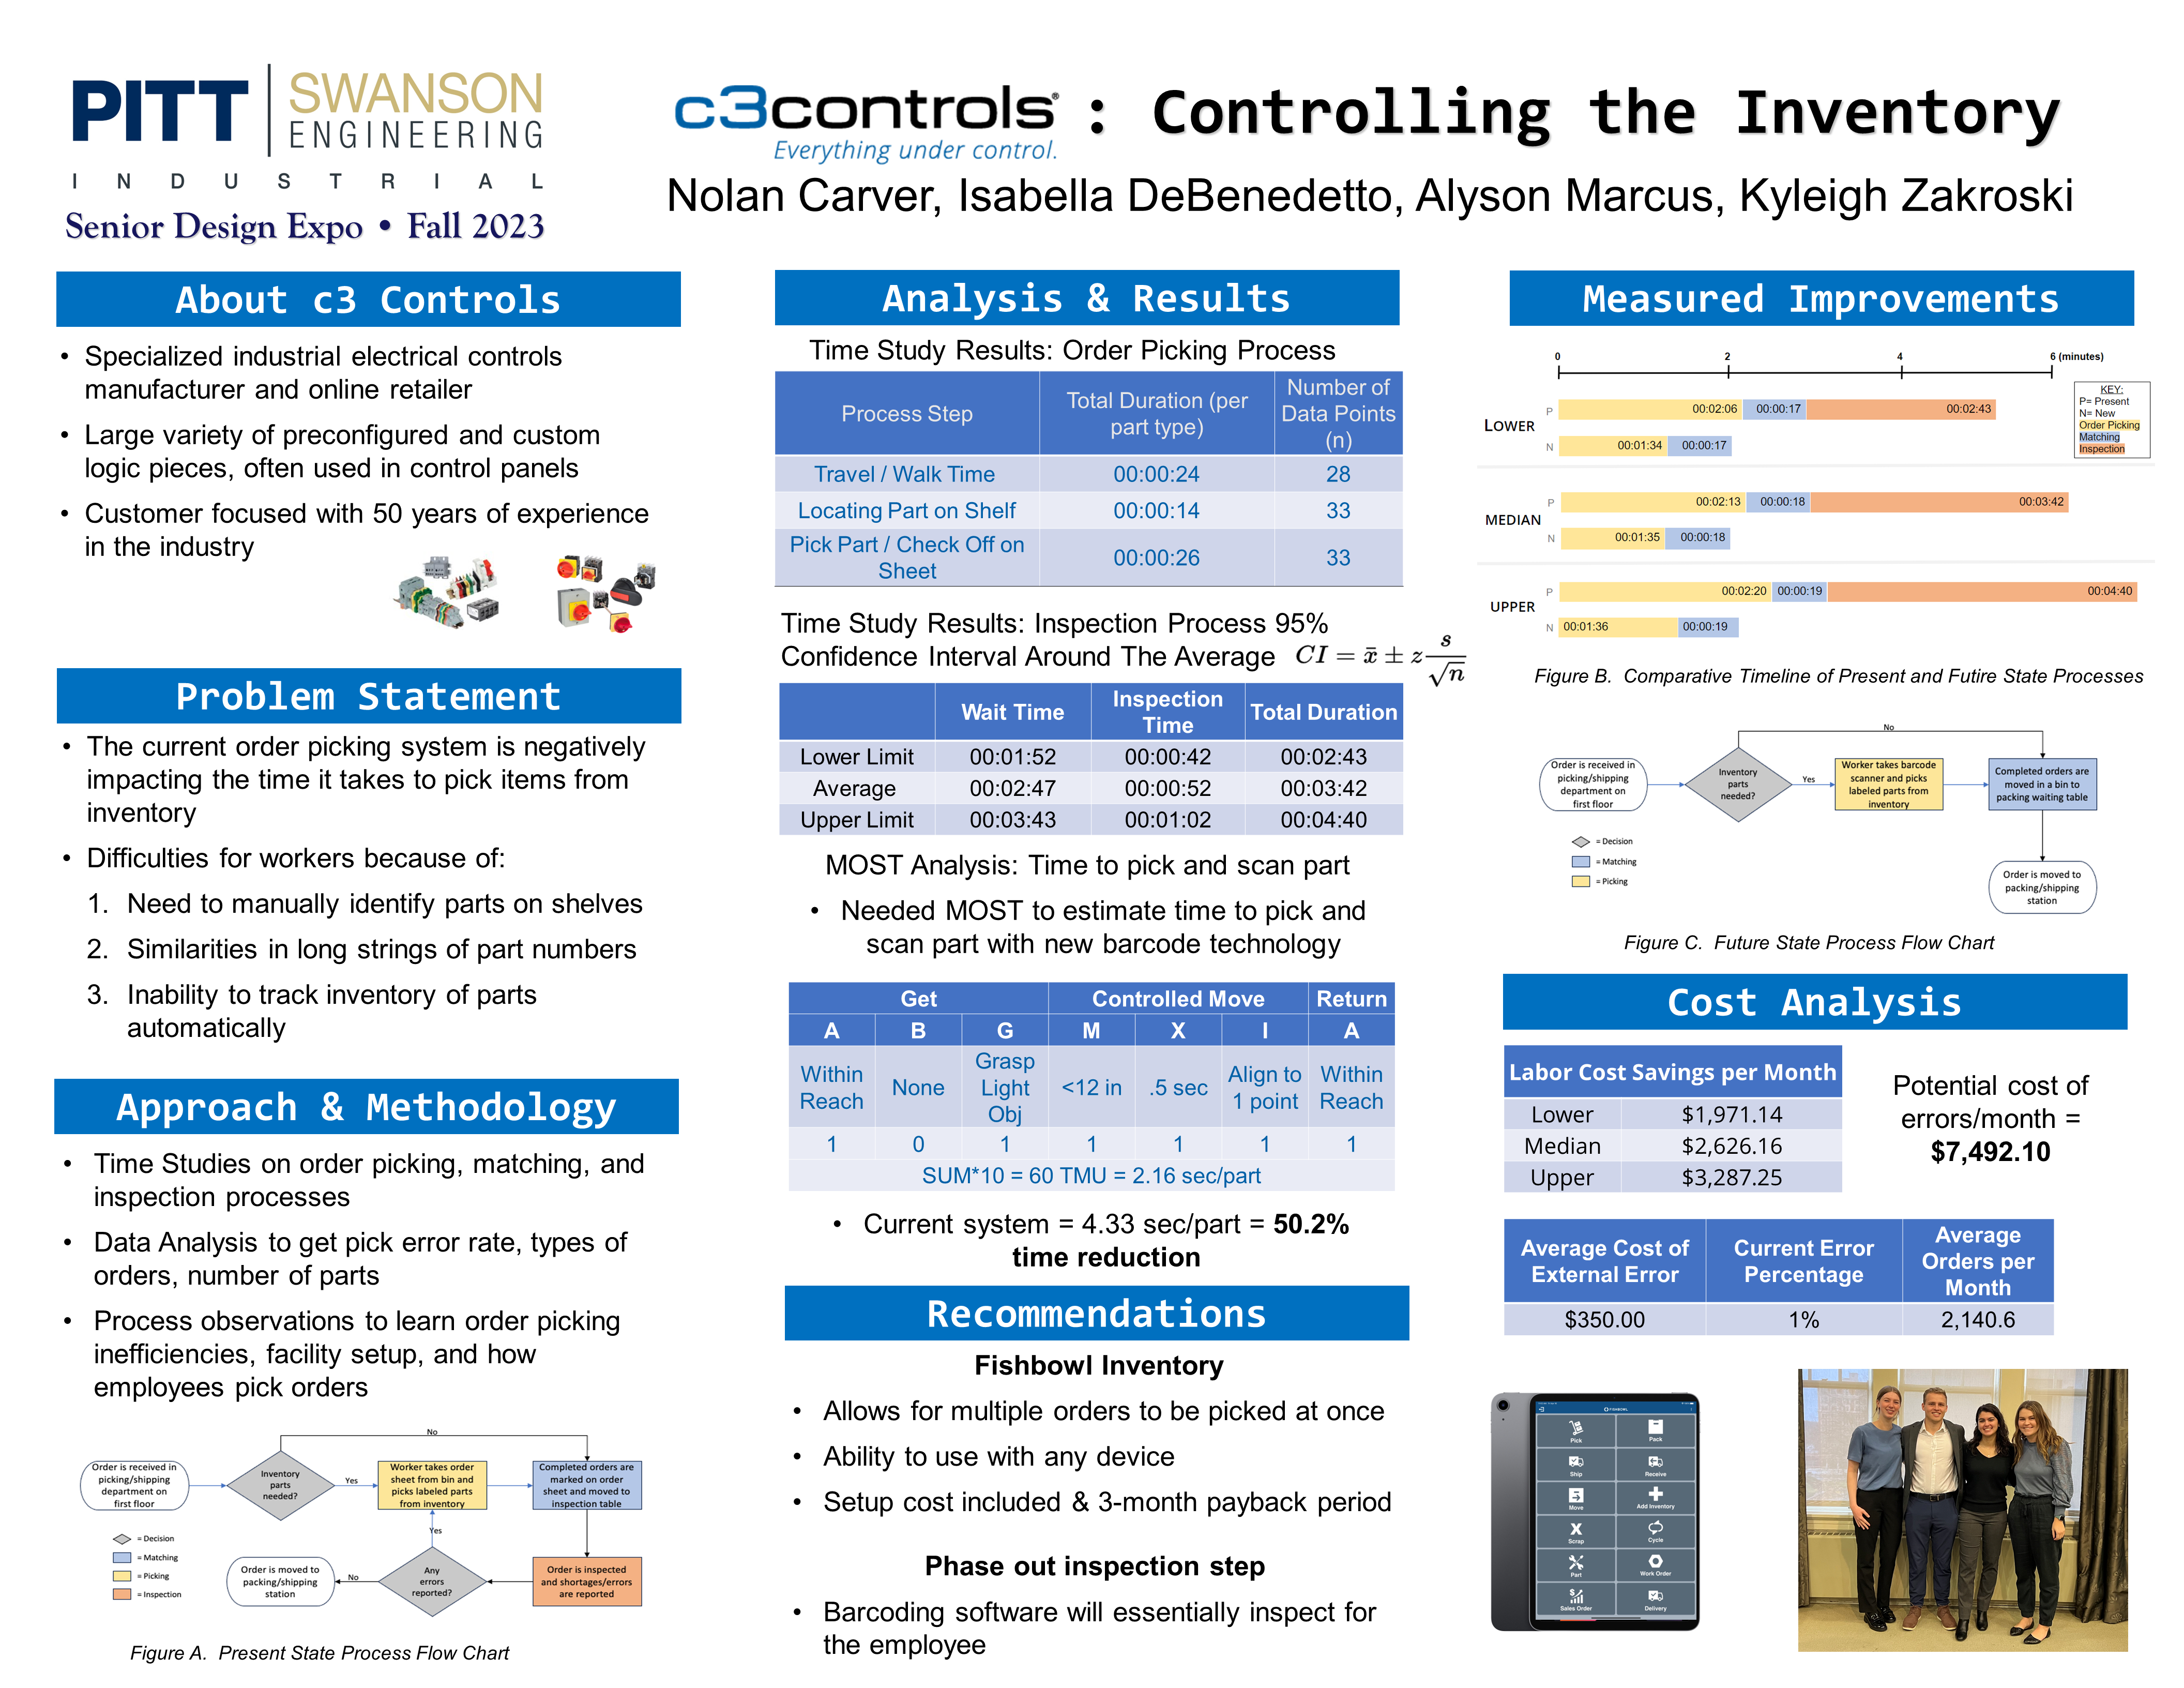 c3 Controls, controlling the inventory research poster with visuals of the project summary keypoints